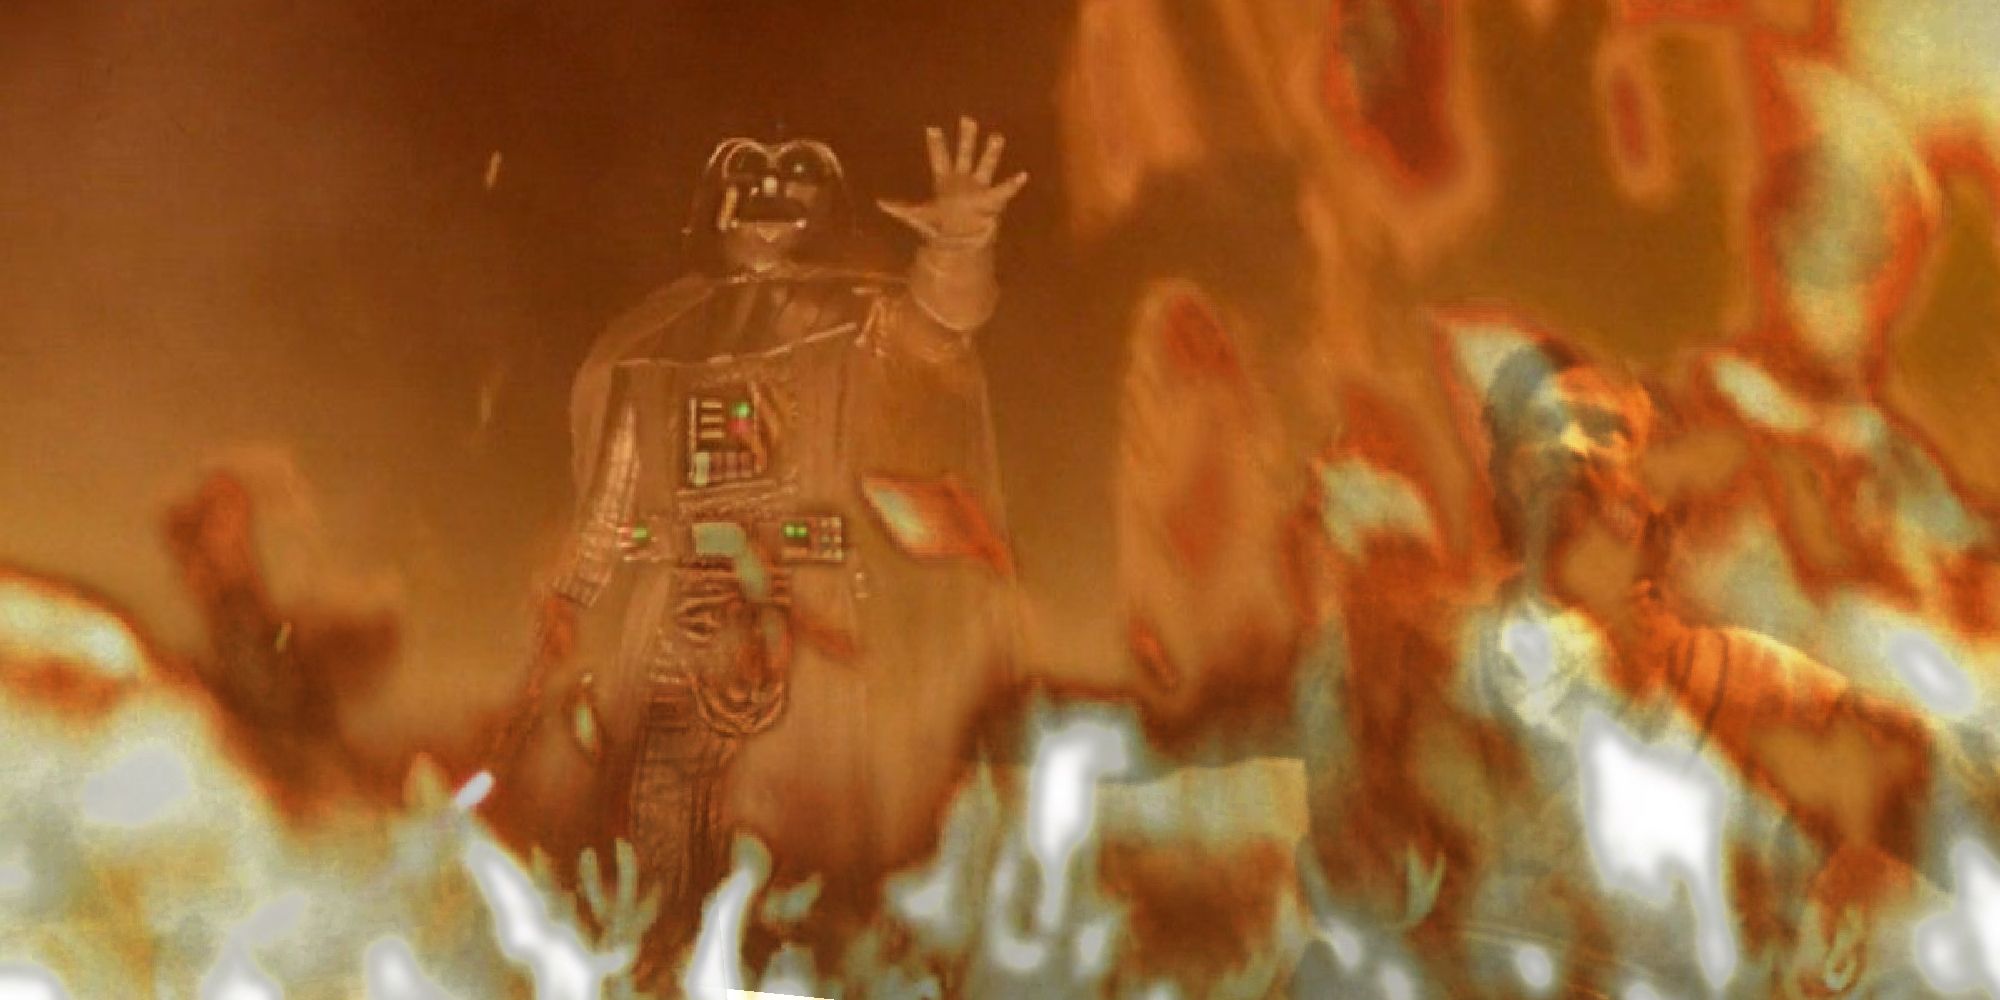 Obi-Wan in the flames of Vader lifting force rocks